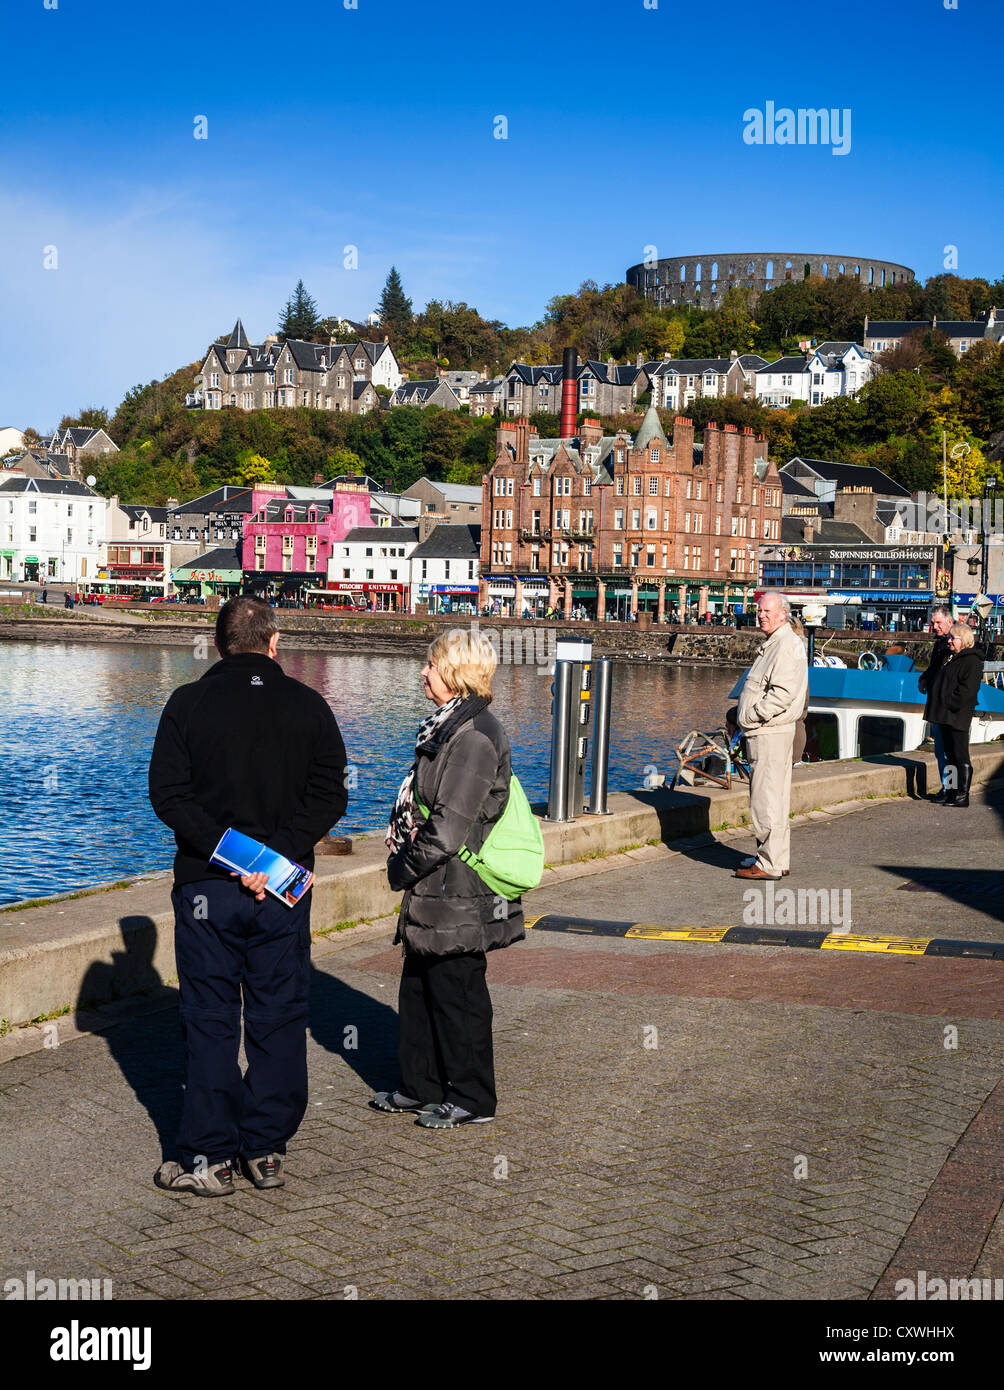 Oban from the harbour with McCaig's Tower on the hill, Oban, Argyll, Scotland. Stock Photo